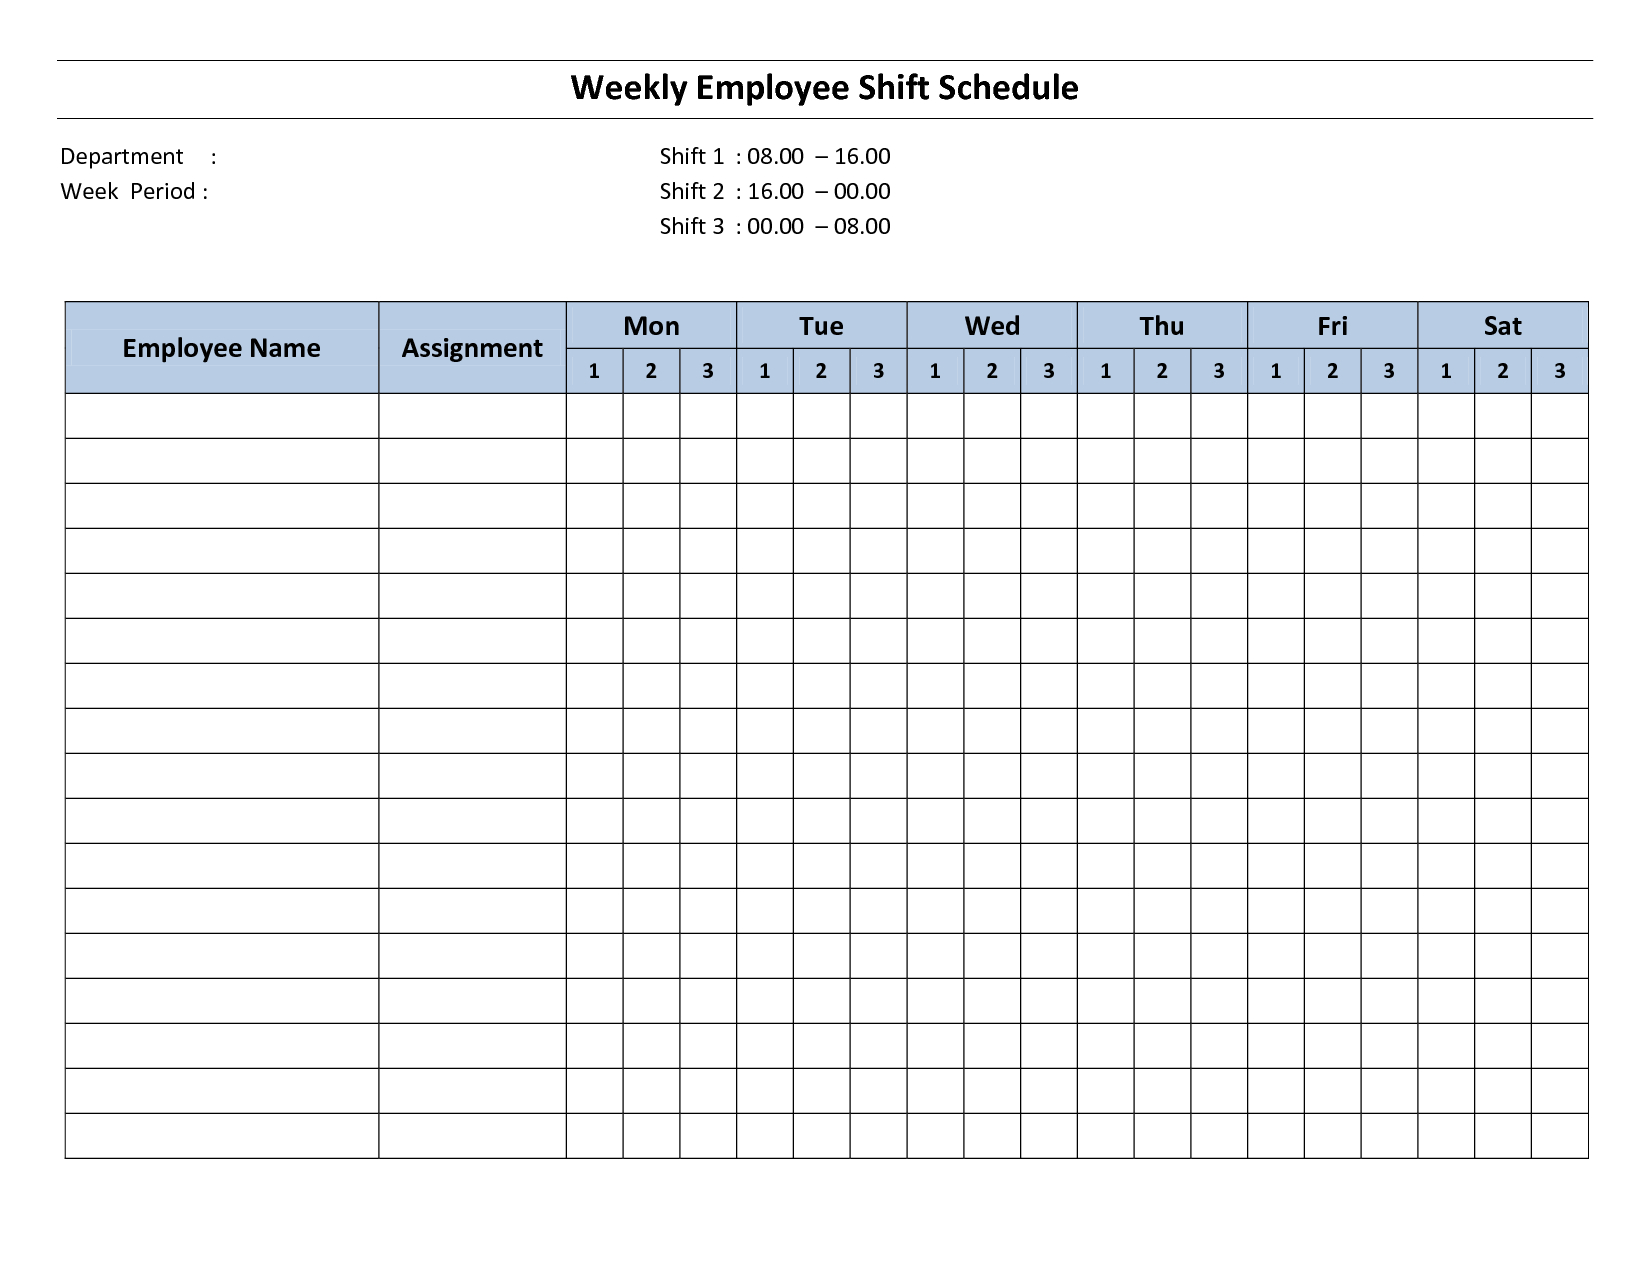 Weekly Employee Shift Schedule - 8 Hour Shift | Monthly